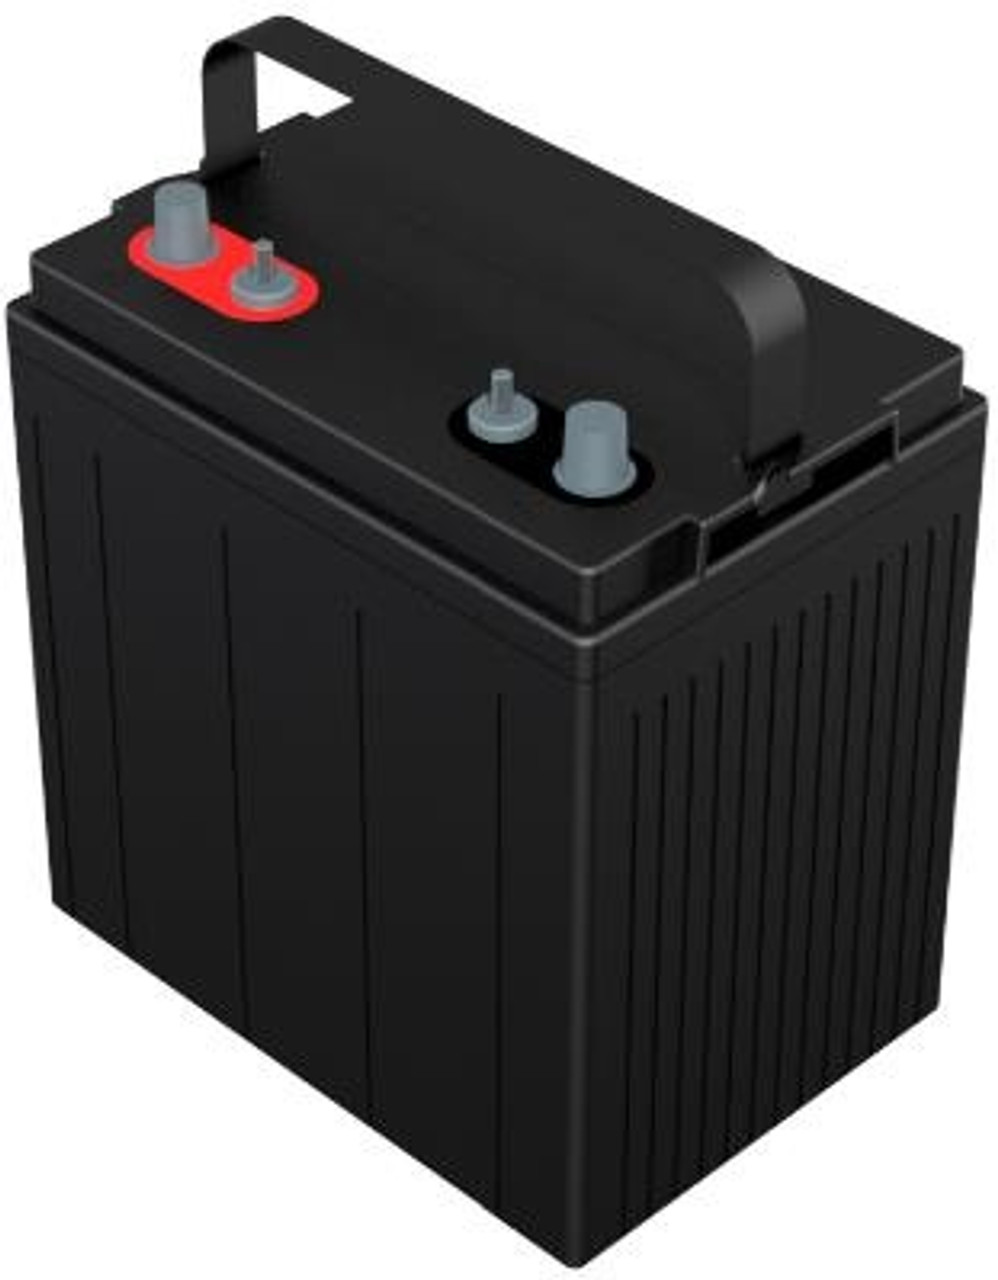 Raion Power RG-GC8-165-DT Replacement Battery for Club Car XRT800 Personal Utility 4X2